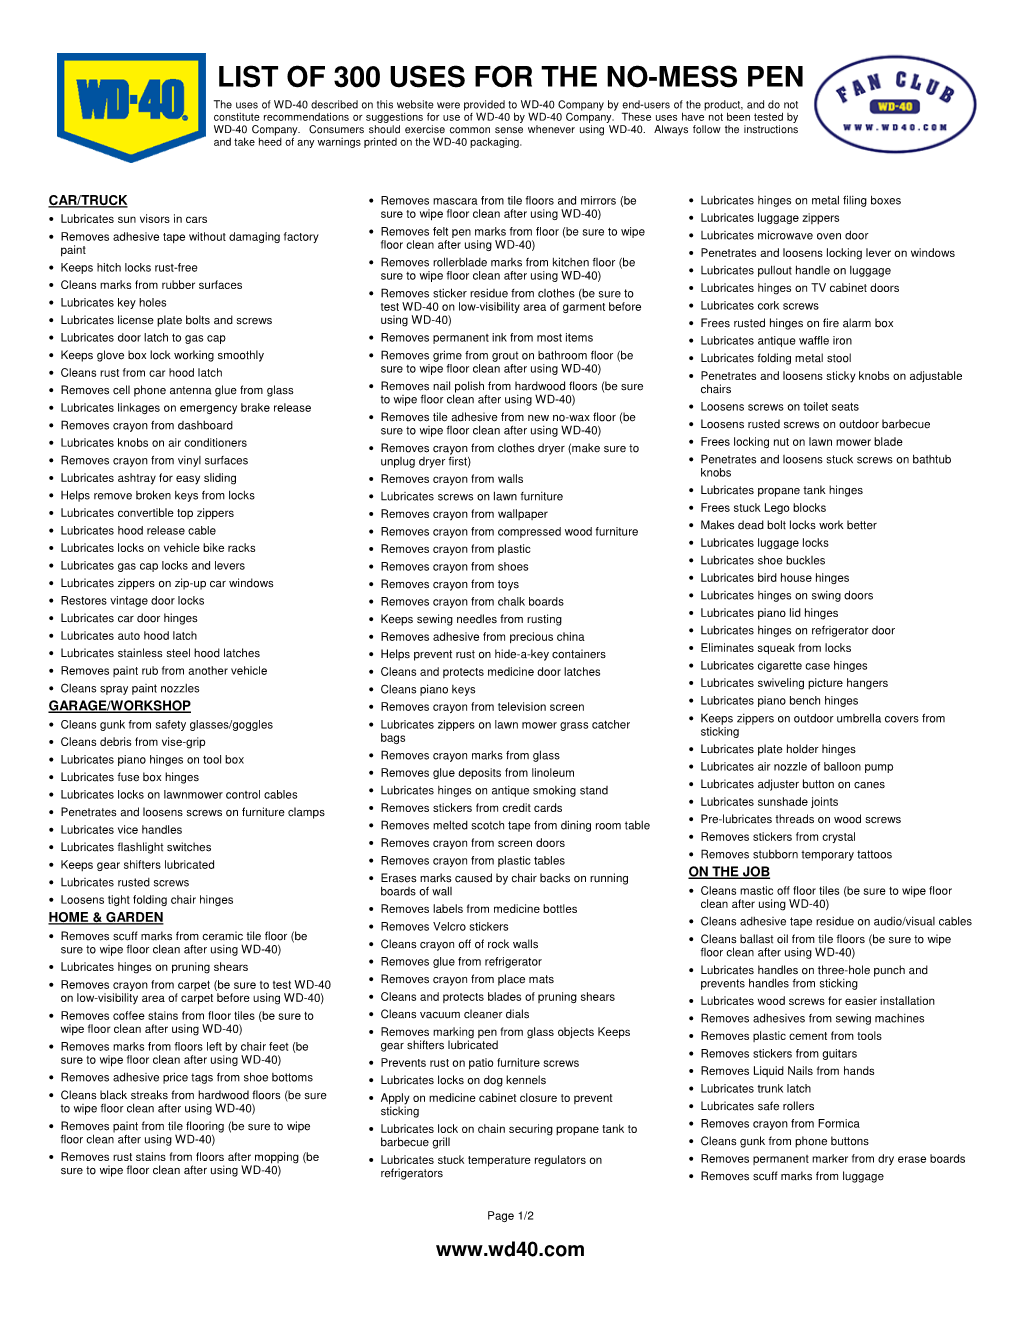 List of 300 Uses for the No-Mess